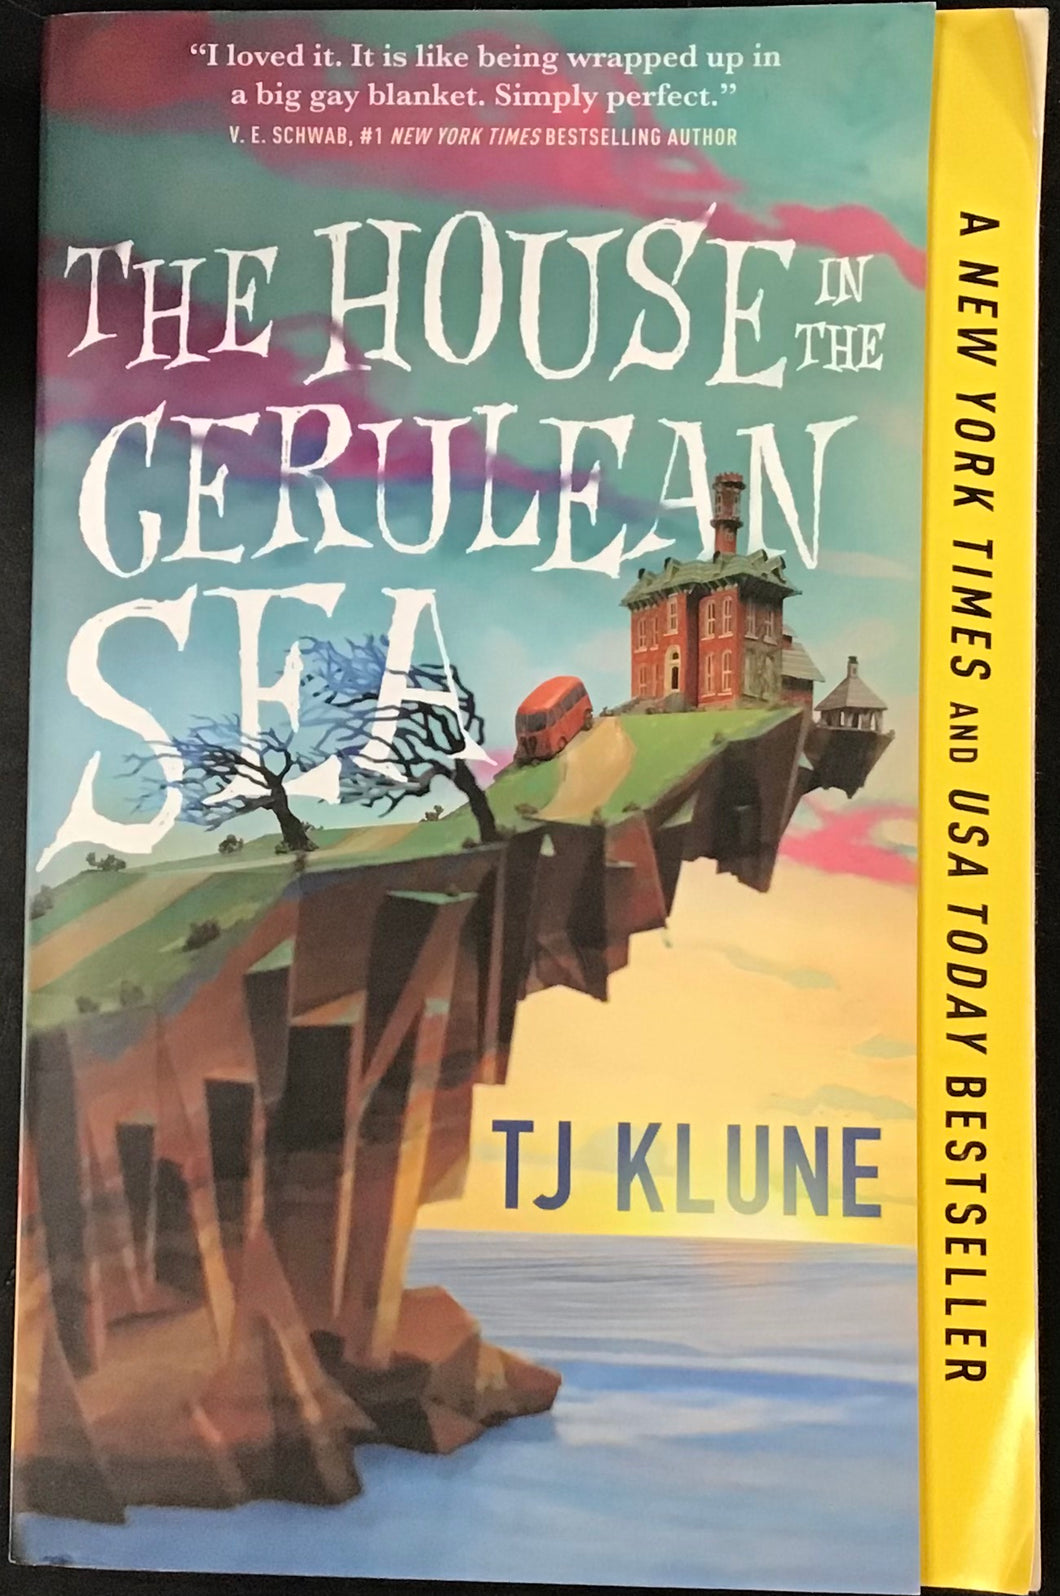 The House in The Cerulean Sea, T.J Klune